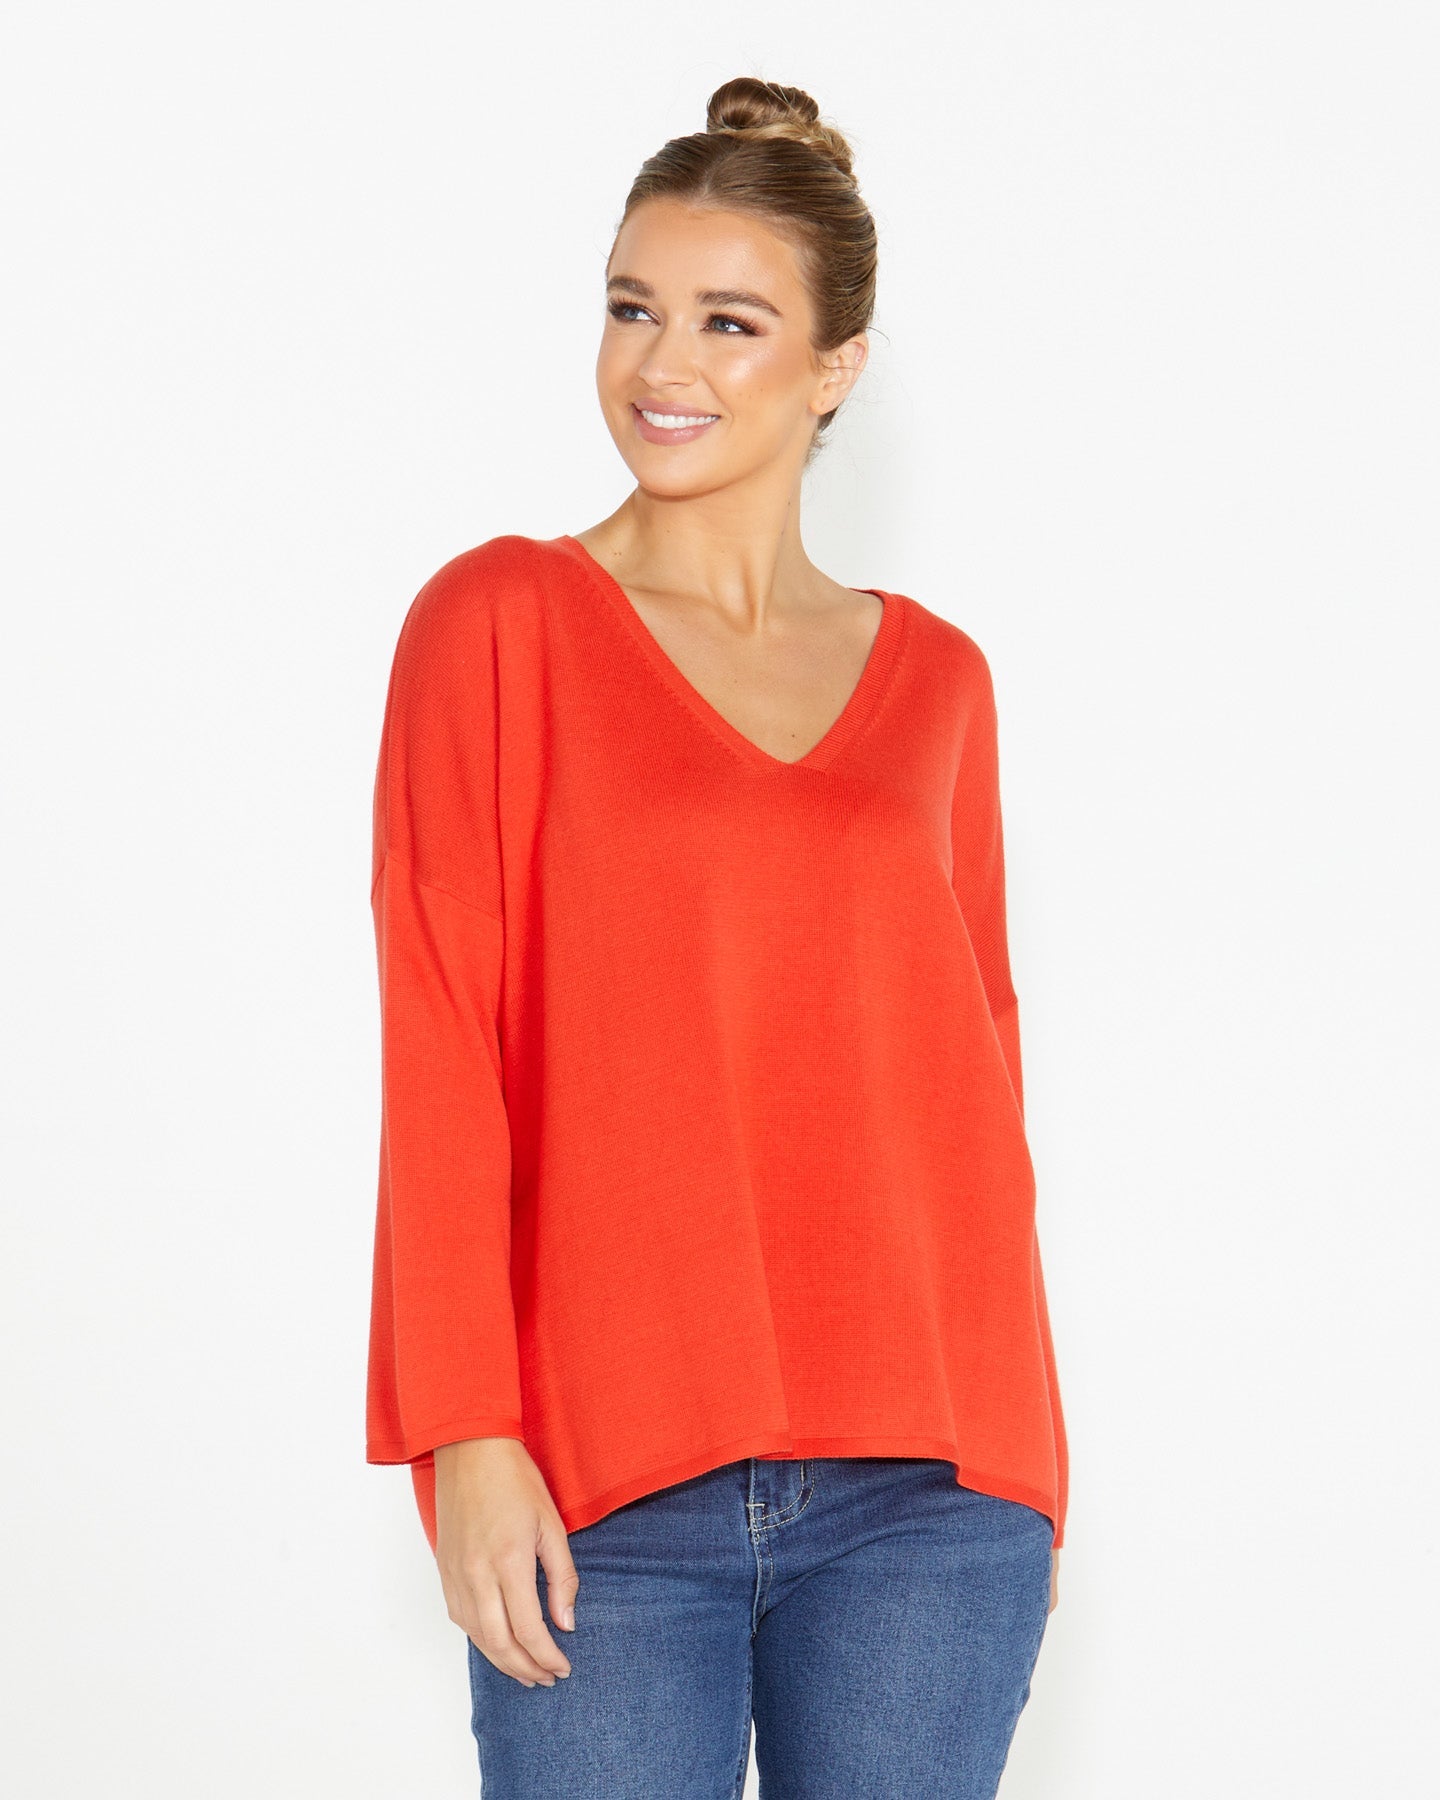 Sass Angelina Reversible Knit - Red